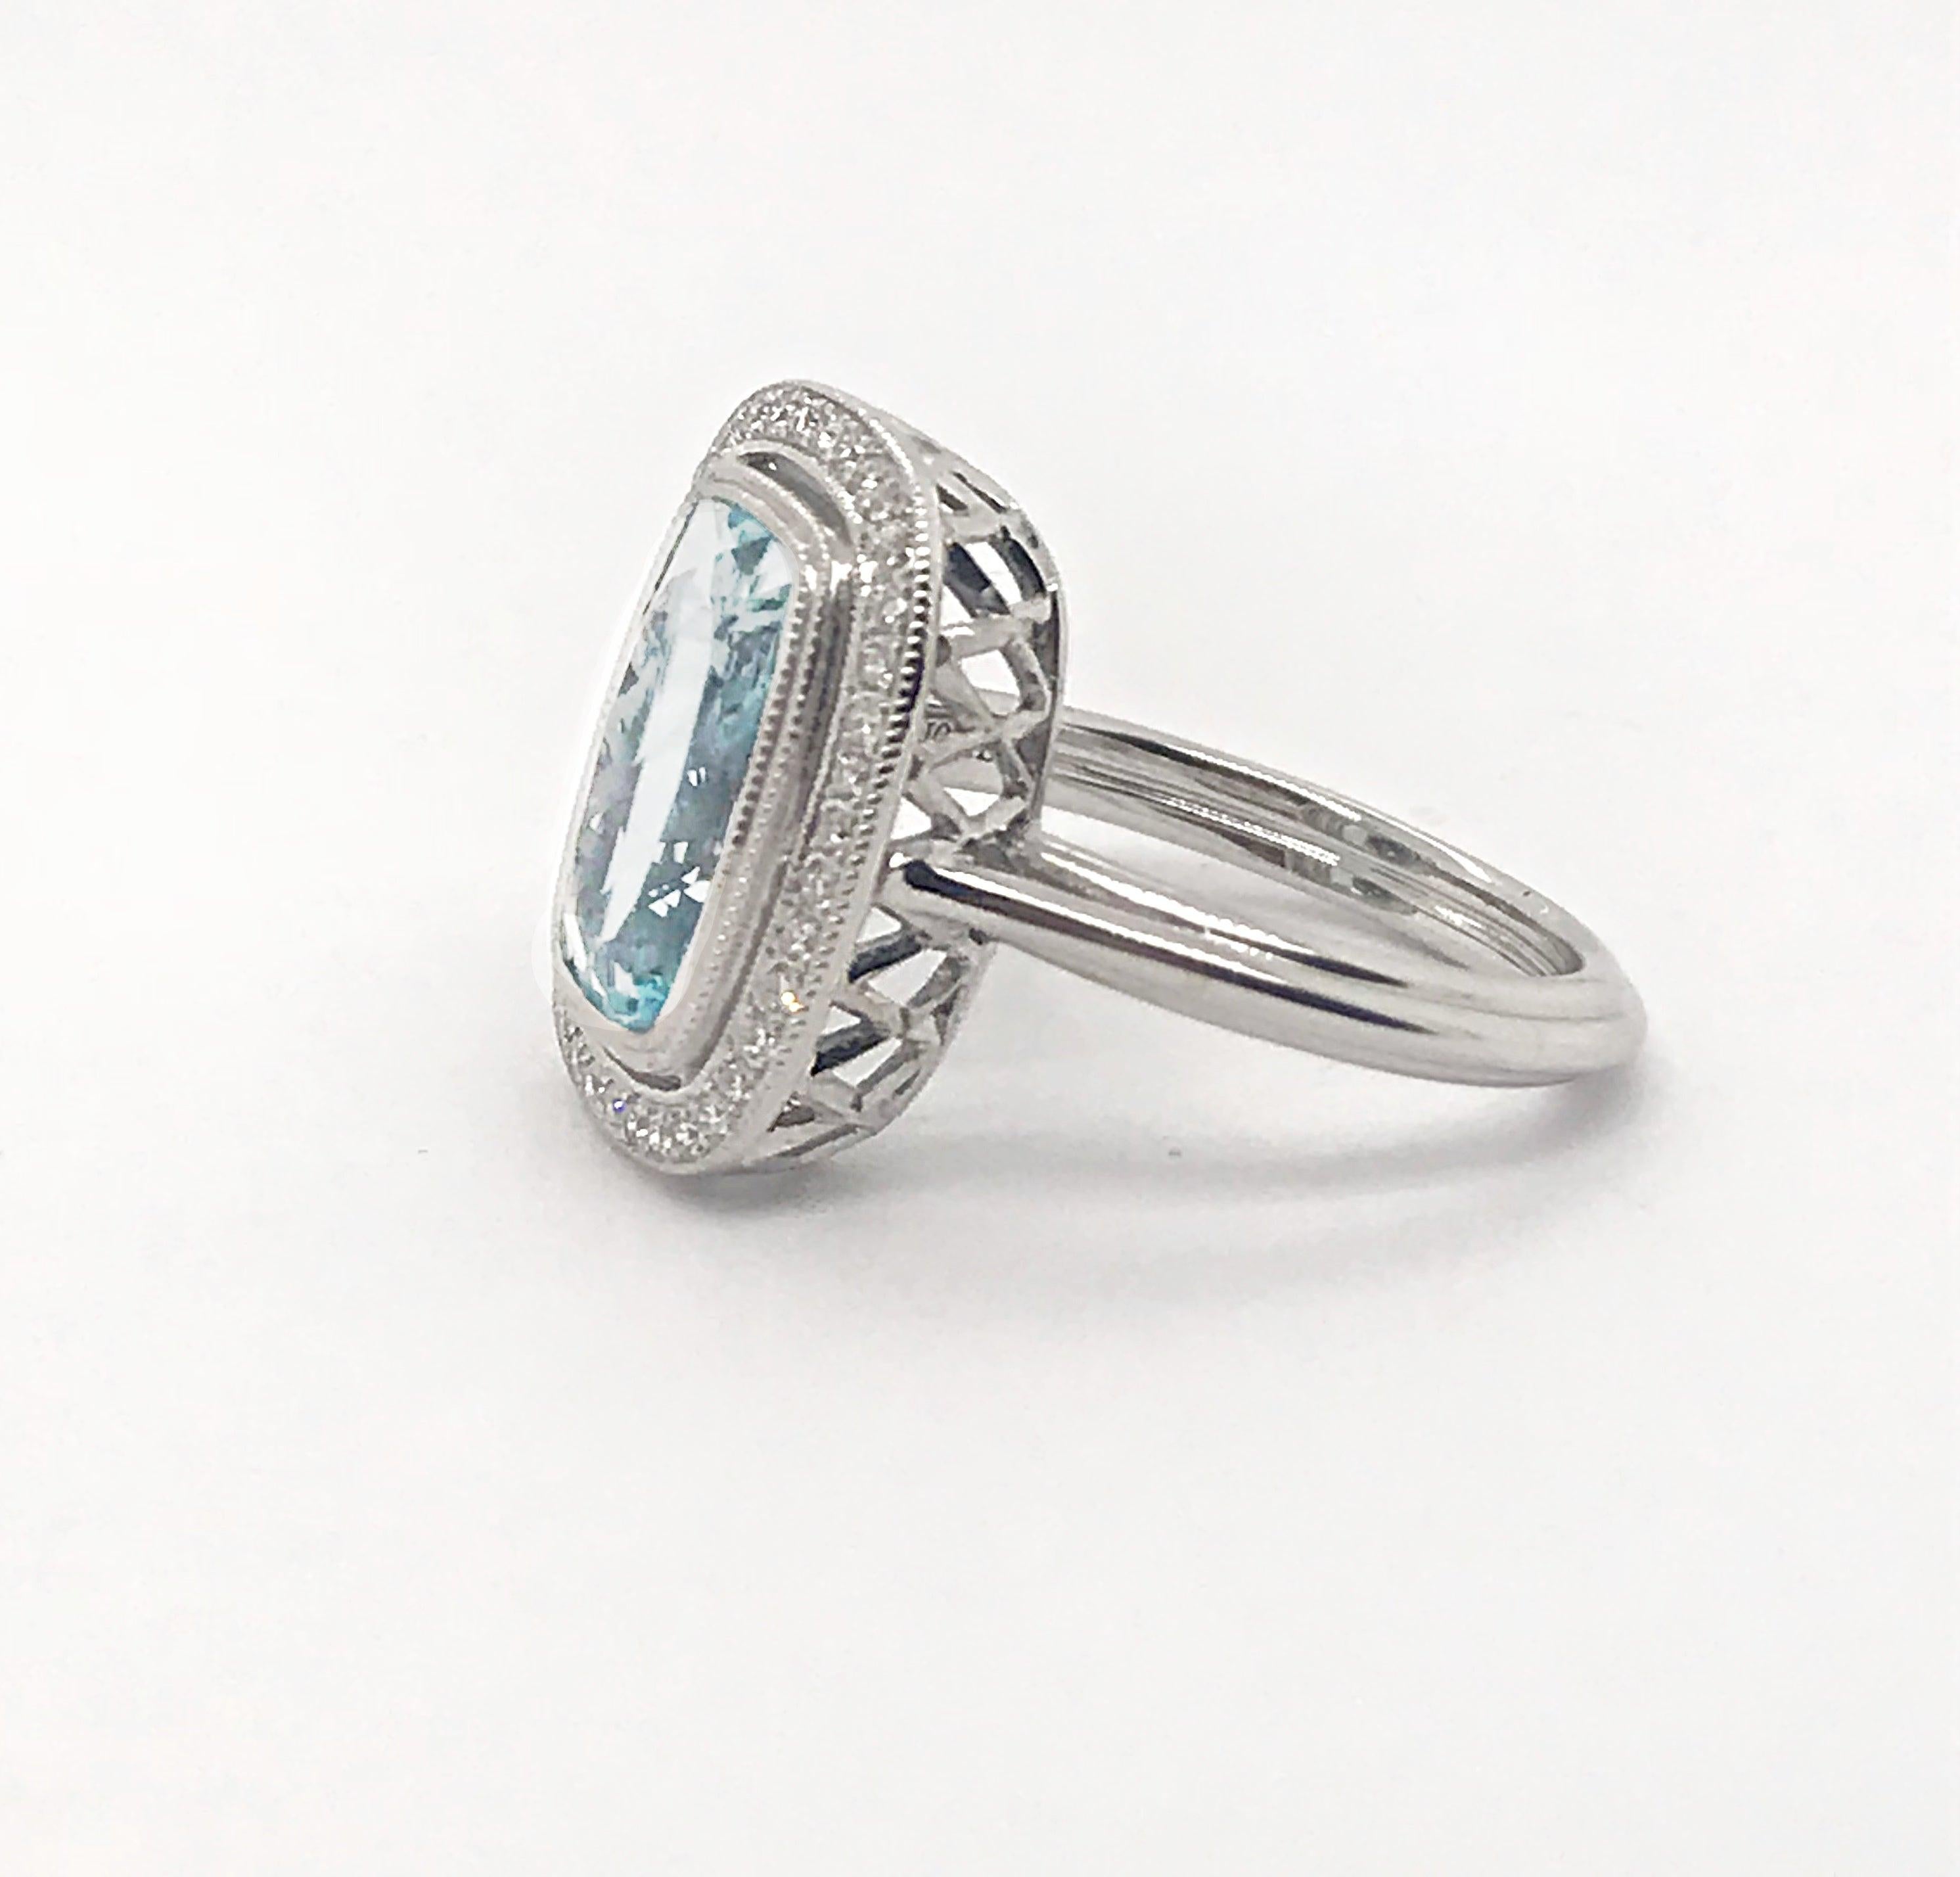 3.04 Carat Cushion Cut Aquamarine and Diamond Ring in 14 Karat White Gold In Excellent Condition For Sale In New Orleans, LA